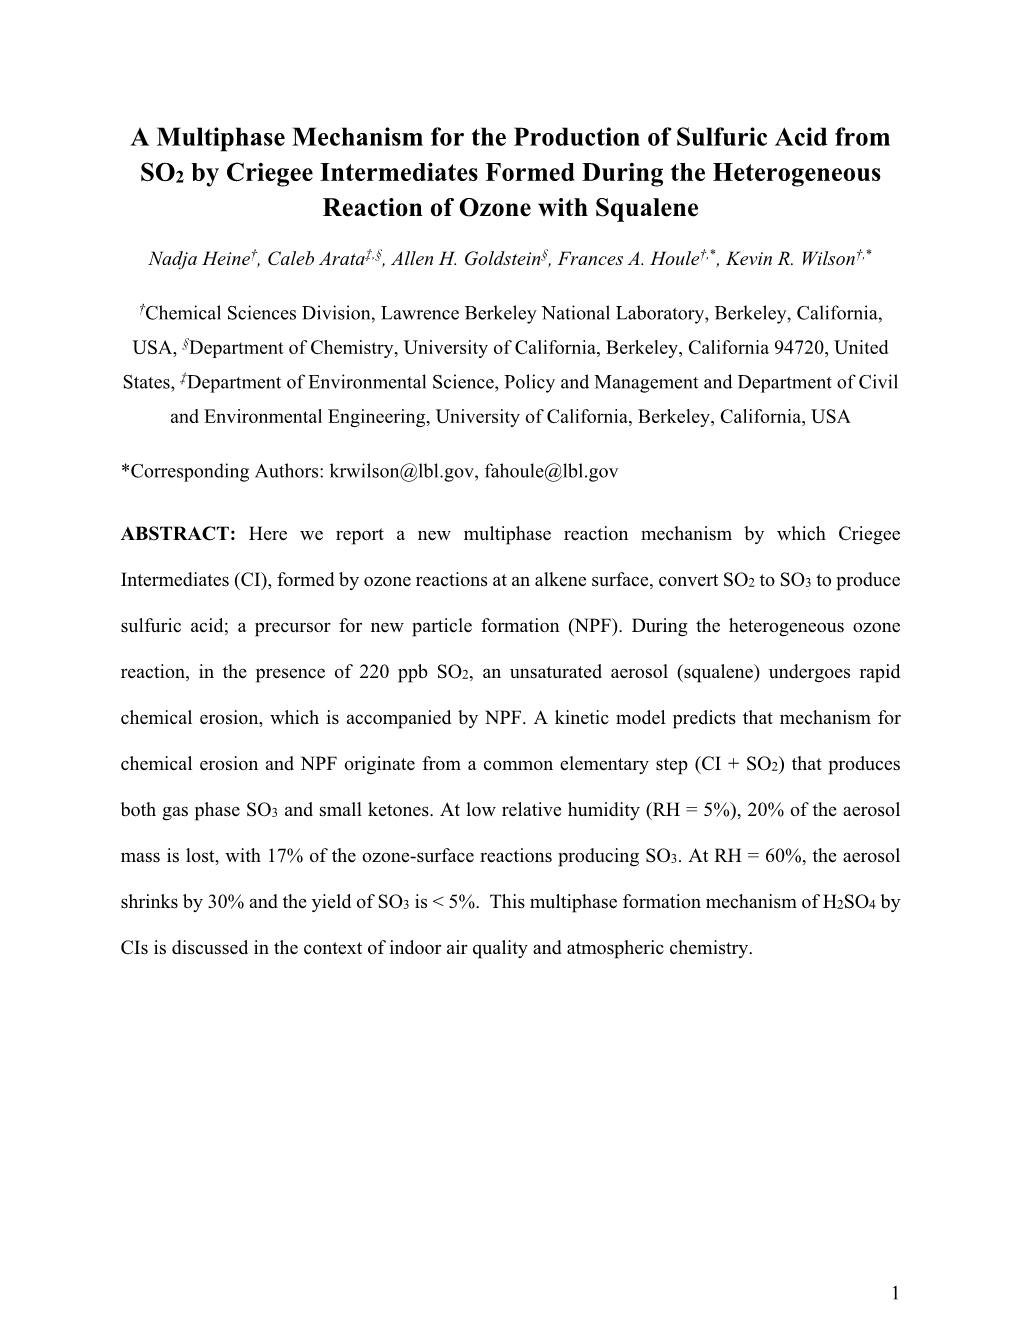 A Multiphase Mechanism for the Production of Sulfuric Acid from SO2 by Criegee Intermediates Formed During the Heterogeneous Reaction of Ozone with Squalene